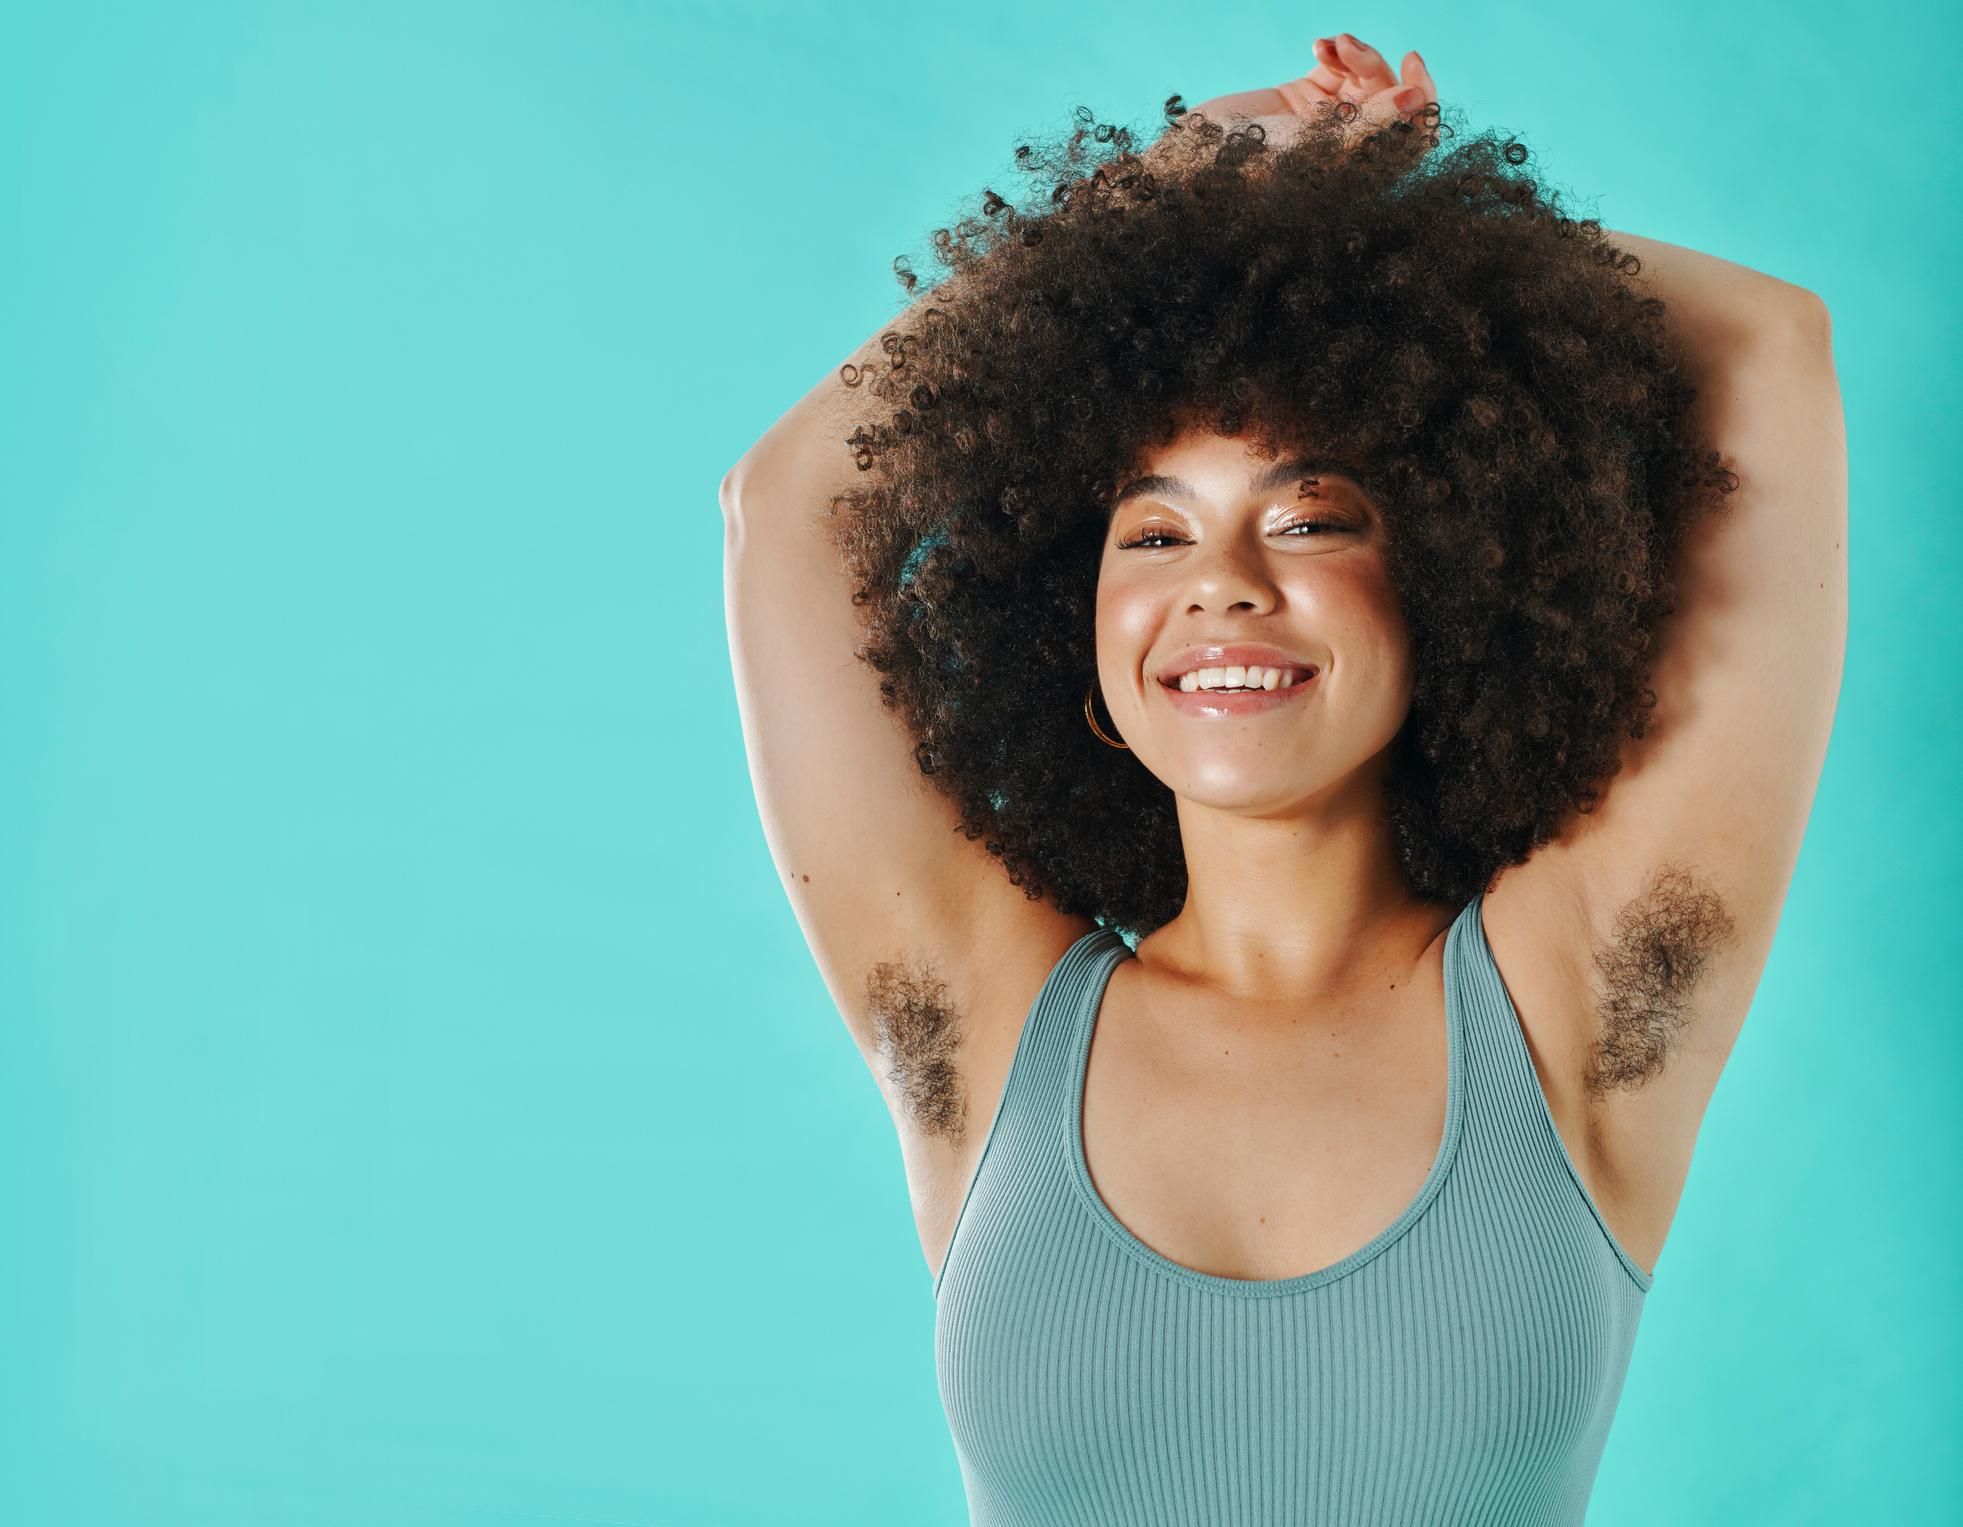 Reductress » Here Is The Pubic Hair Style Everyone Had The Year You Were  Born